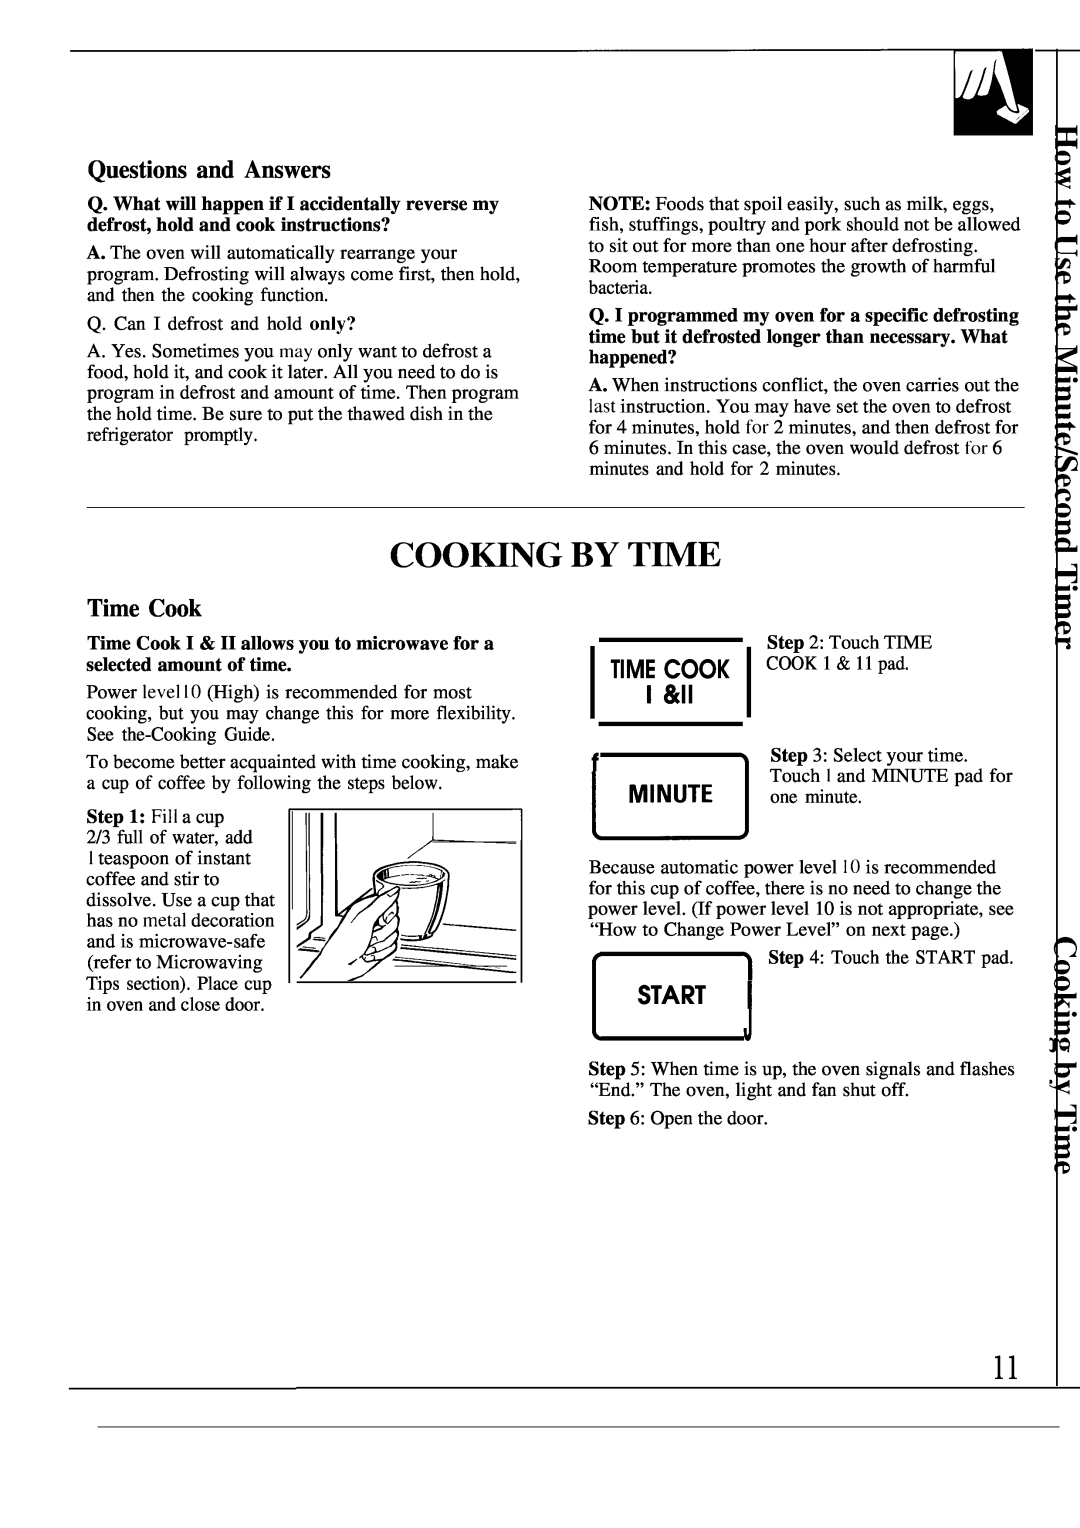 GE JVM139K warranty Questions and Answers, Time Cook I &Ii, Start 